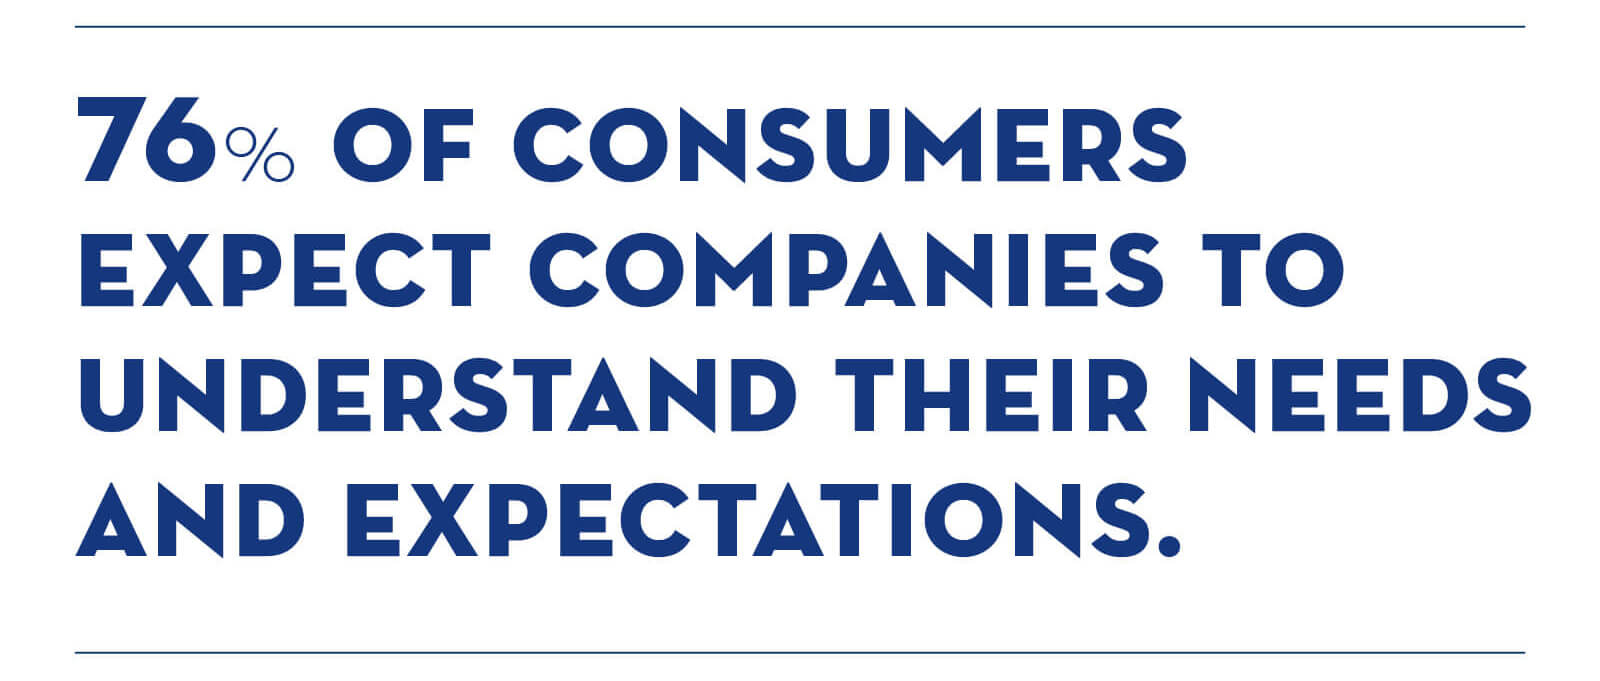 What Are Customer Expectations And How Have They Changed - 76 of consumers expect companies to understand their needs and expectations